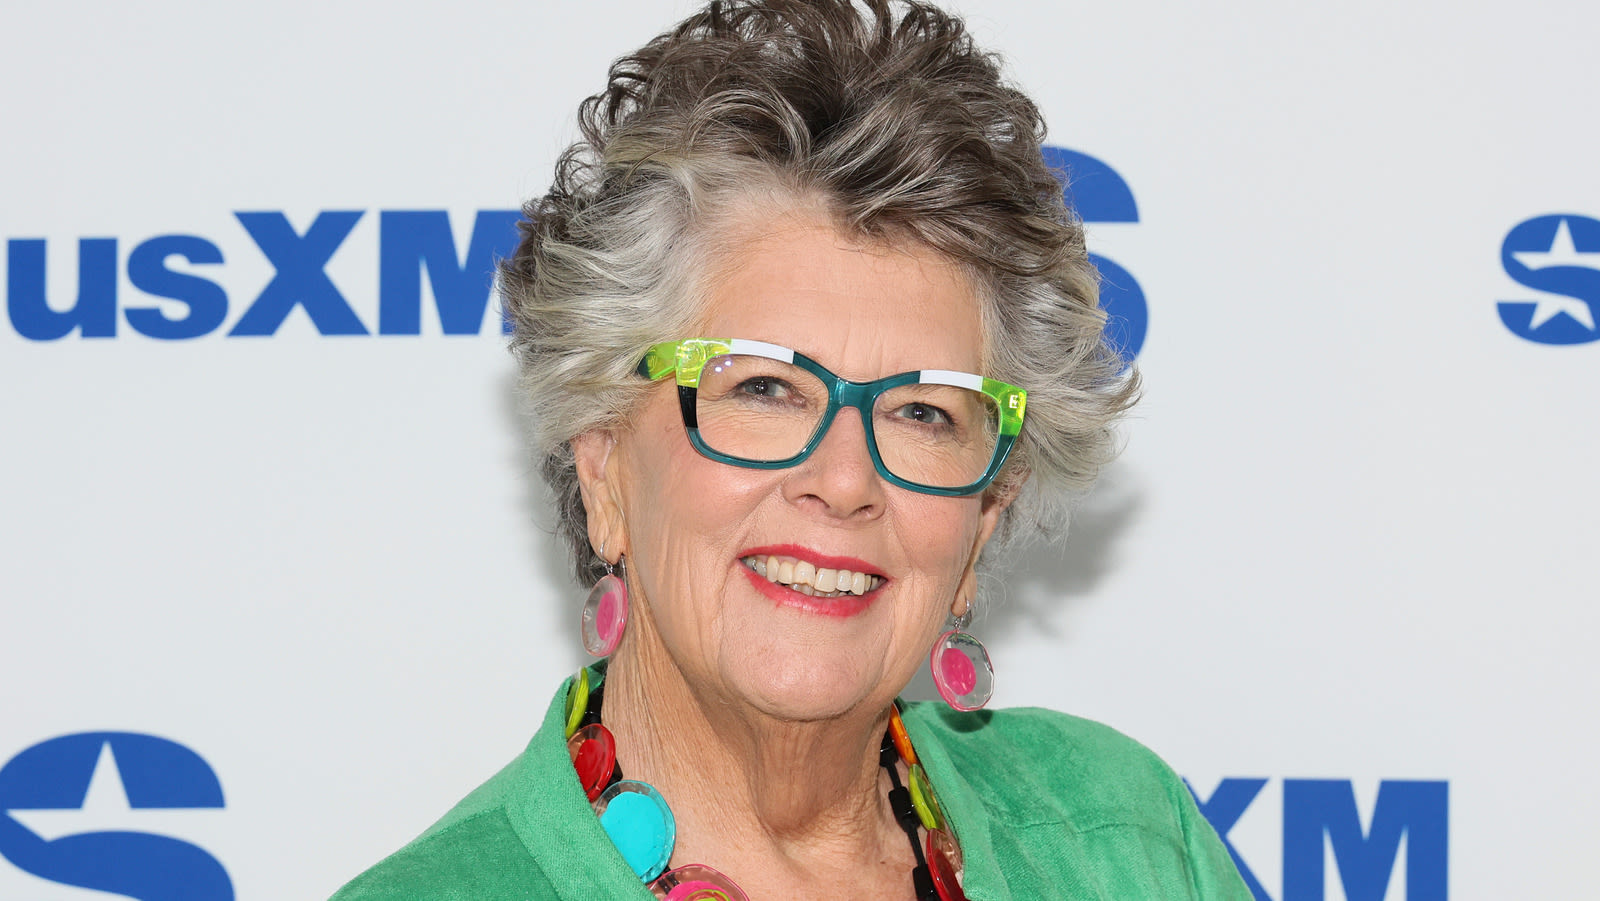 The Successful Business Prue Leith Had Before Starring On The Great British Baking Show